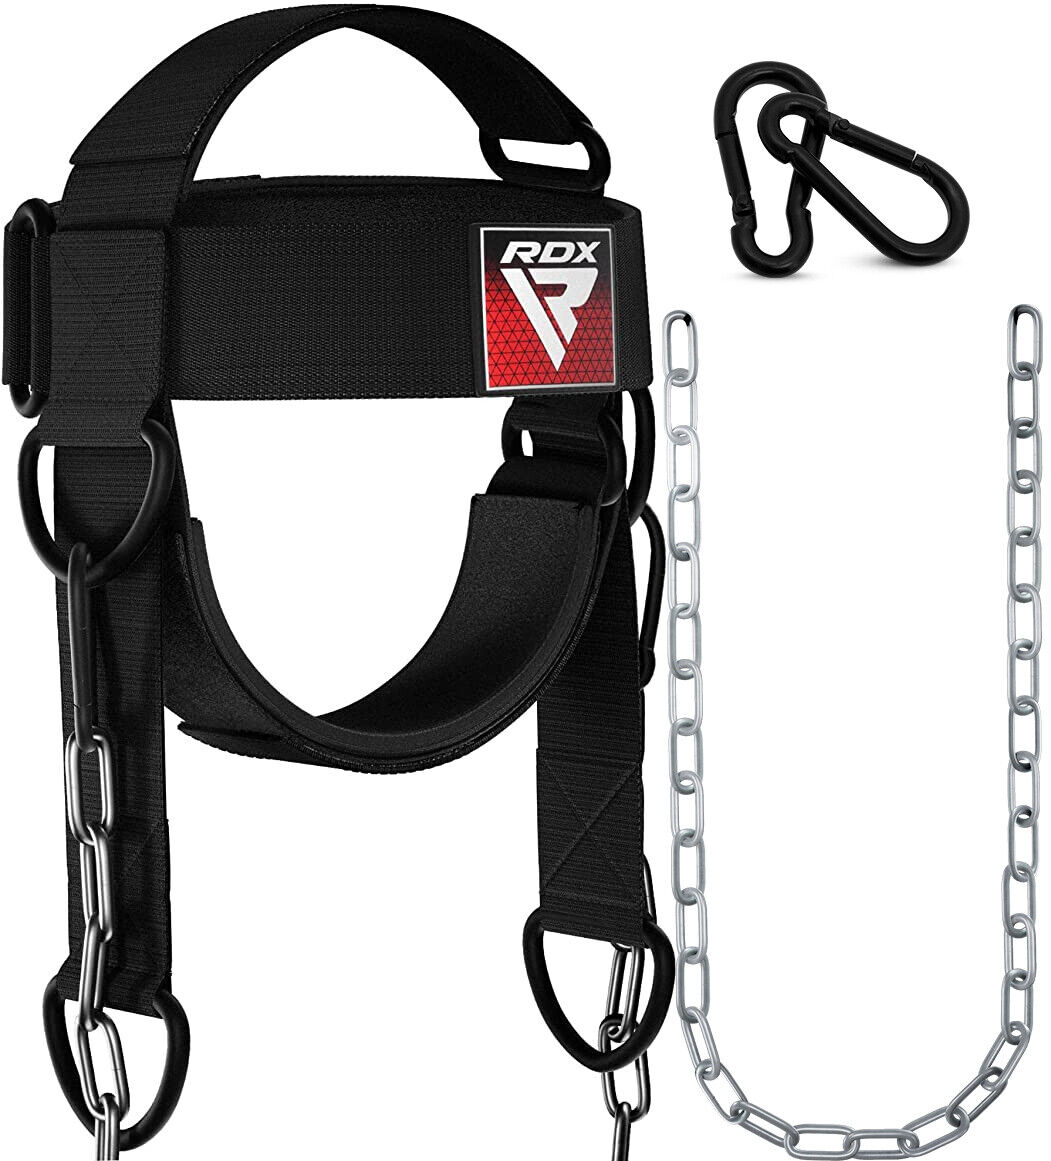 RDX Head Harness Weight Lifting Training Neck Strengthener W